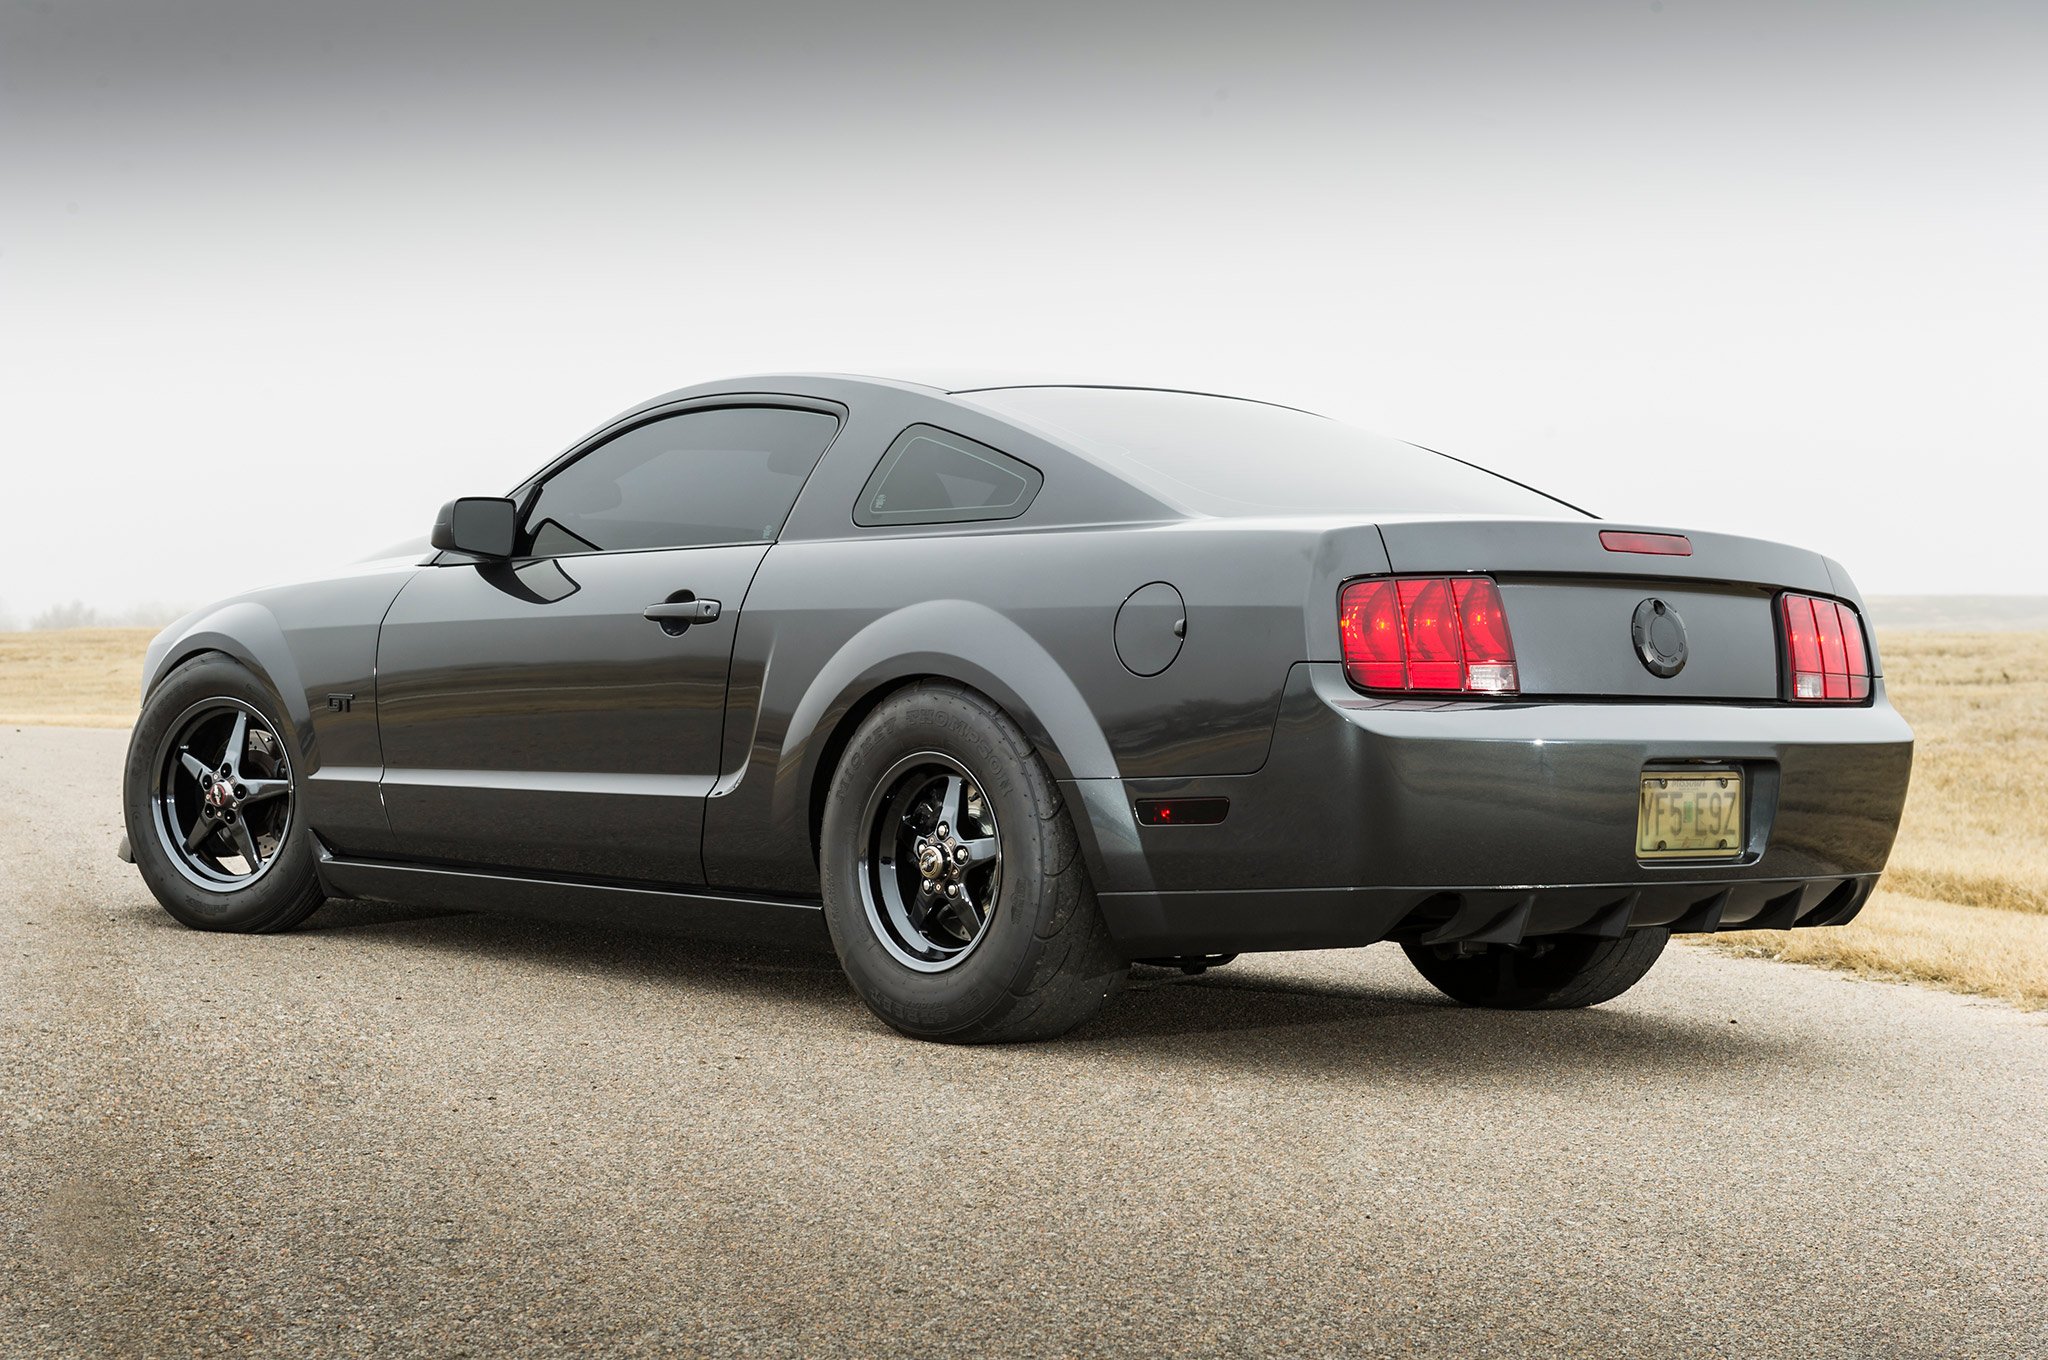 2007, Ford, Mustang, Gt, Pro, Street, Super, Drag, Muscle, Usa, 2048x1360 10 Wallpaper